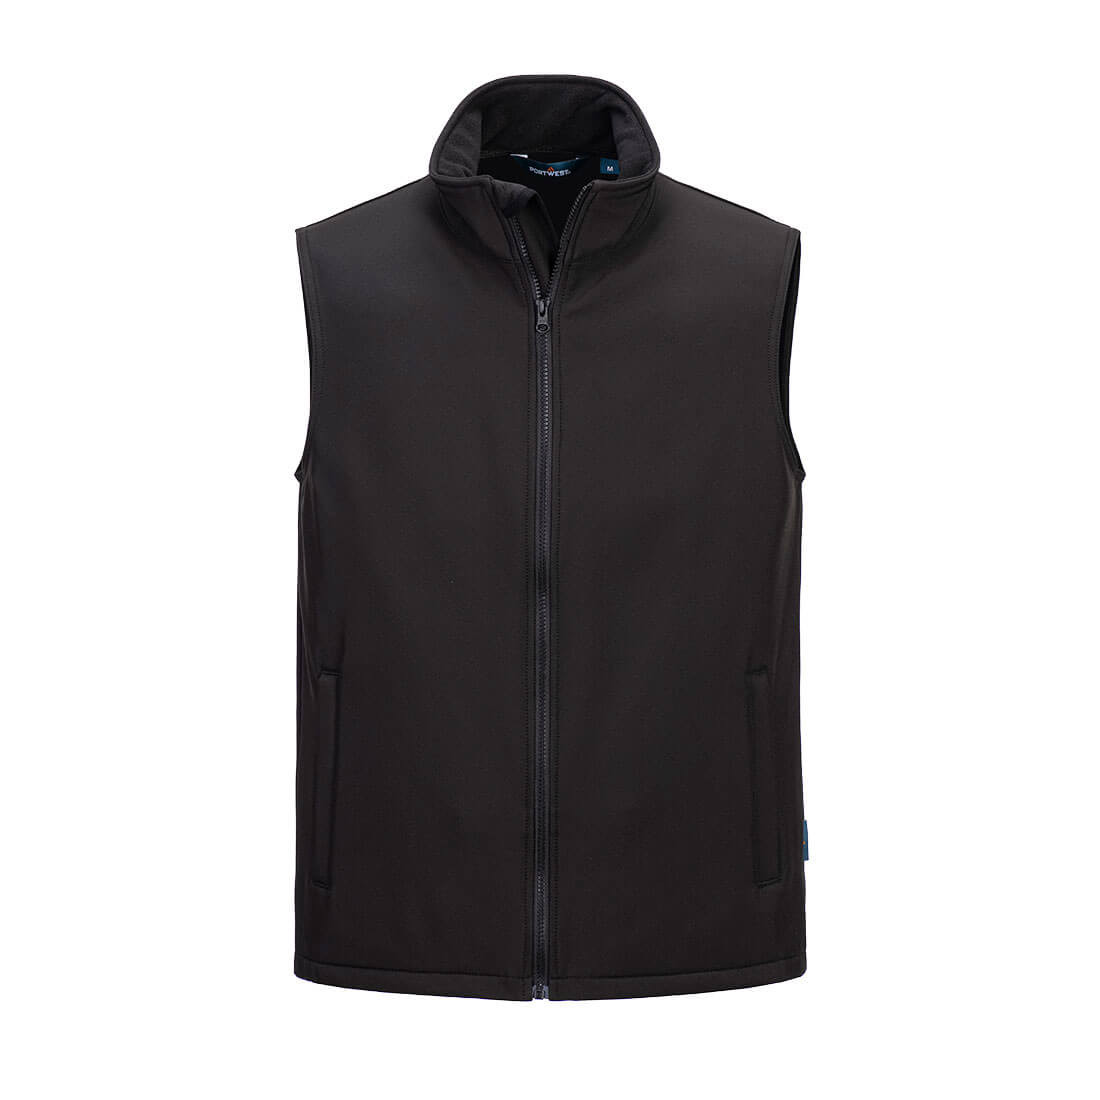 Print and Promo Softshell Gilet (2L) - Safetywear